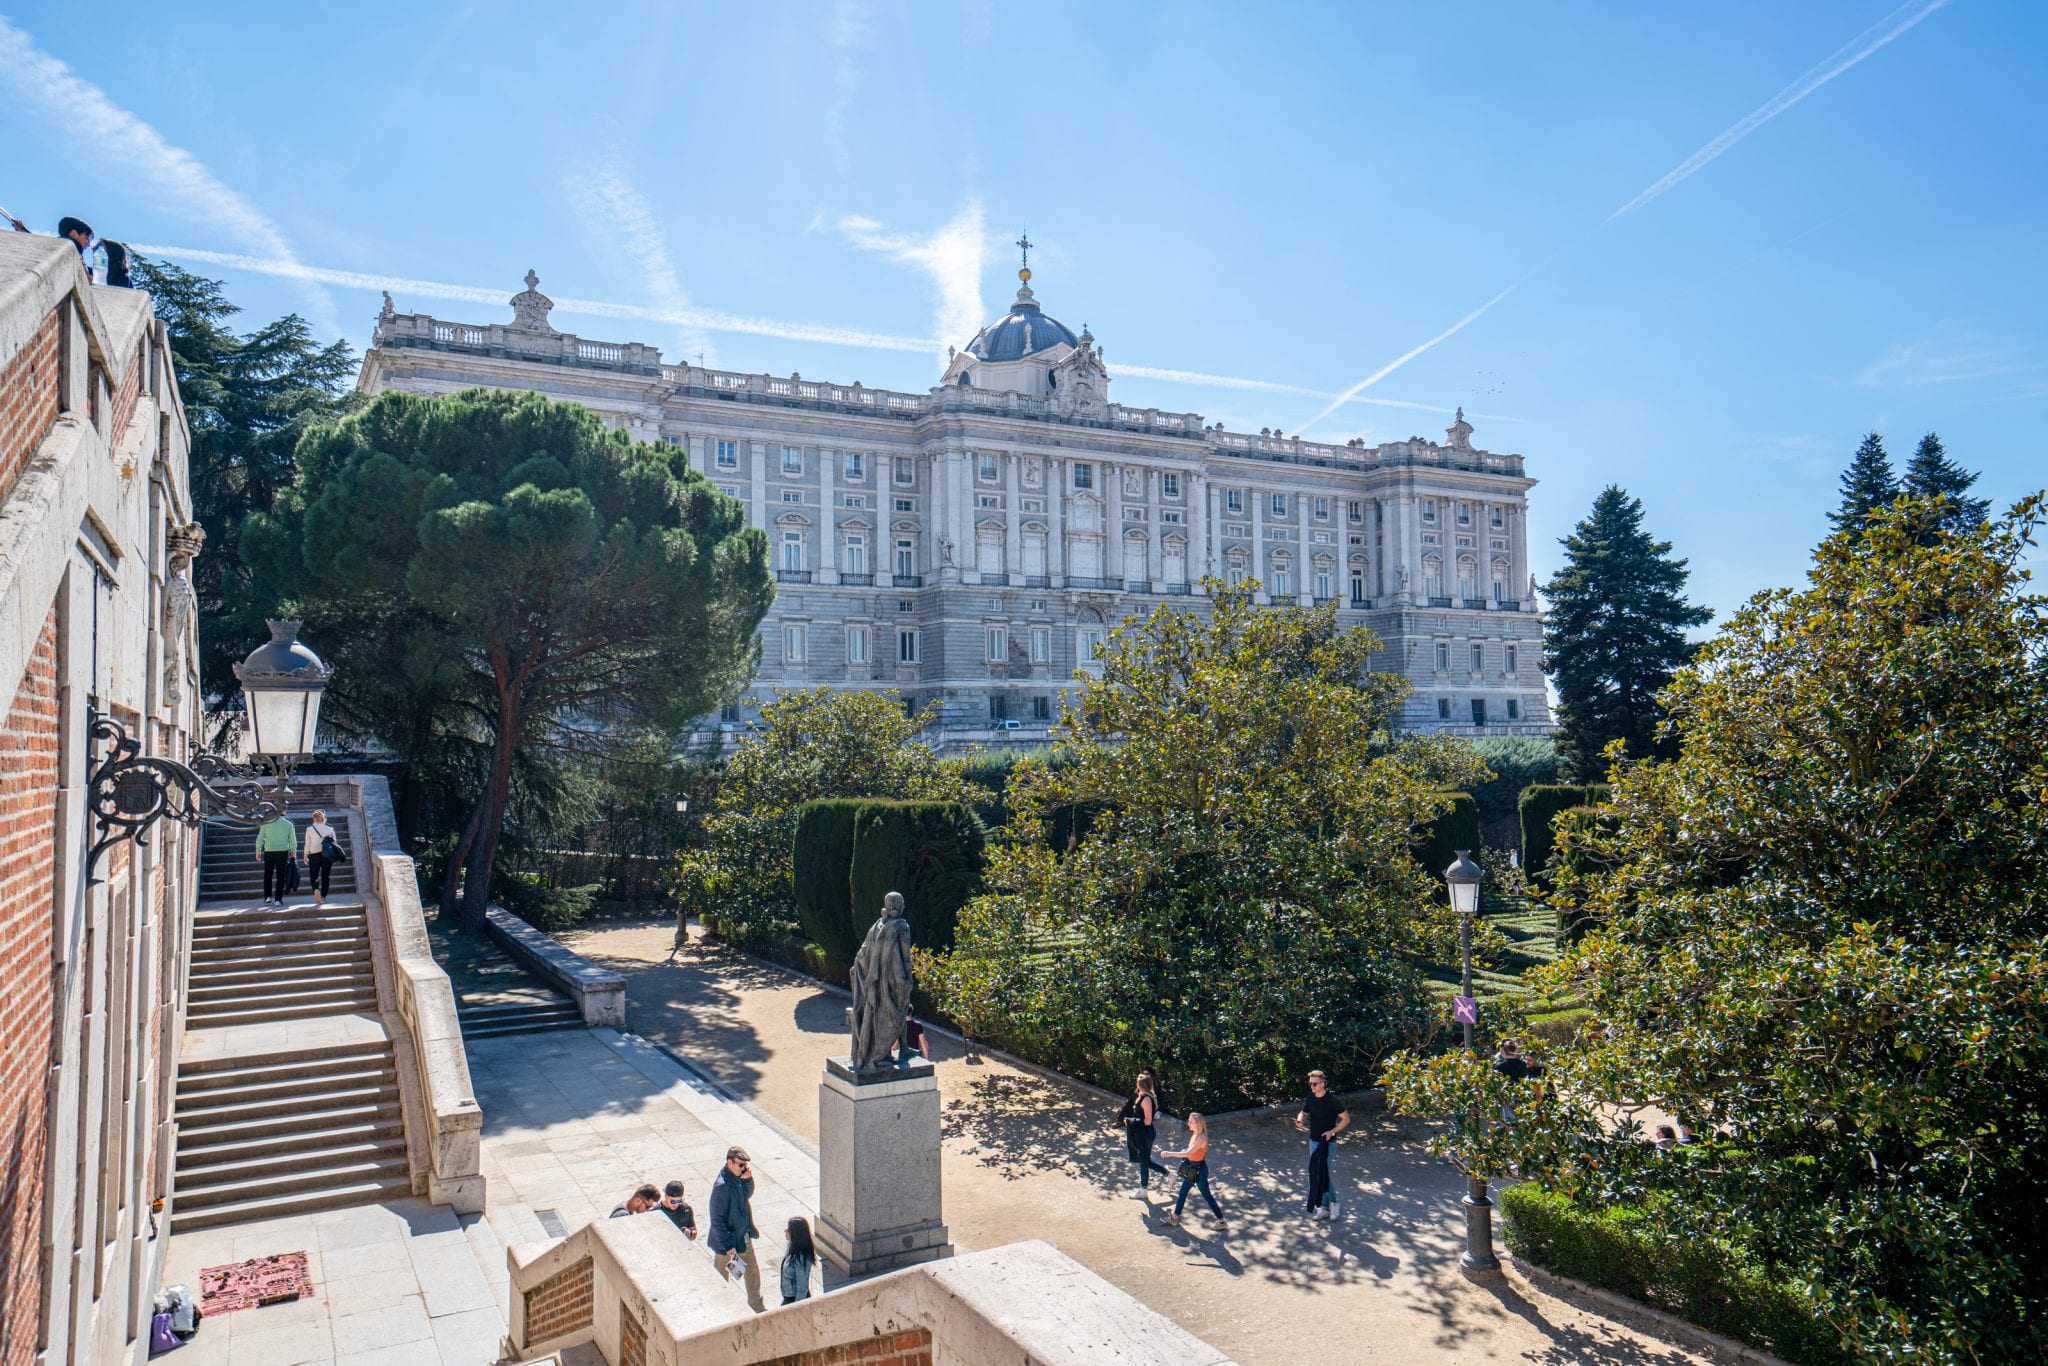 Madrid Royal Palace with garden in foreground, a must see during your 3 days in Madrid Itinerary!